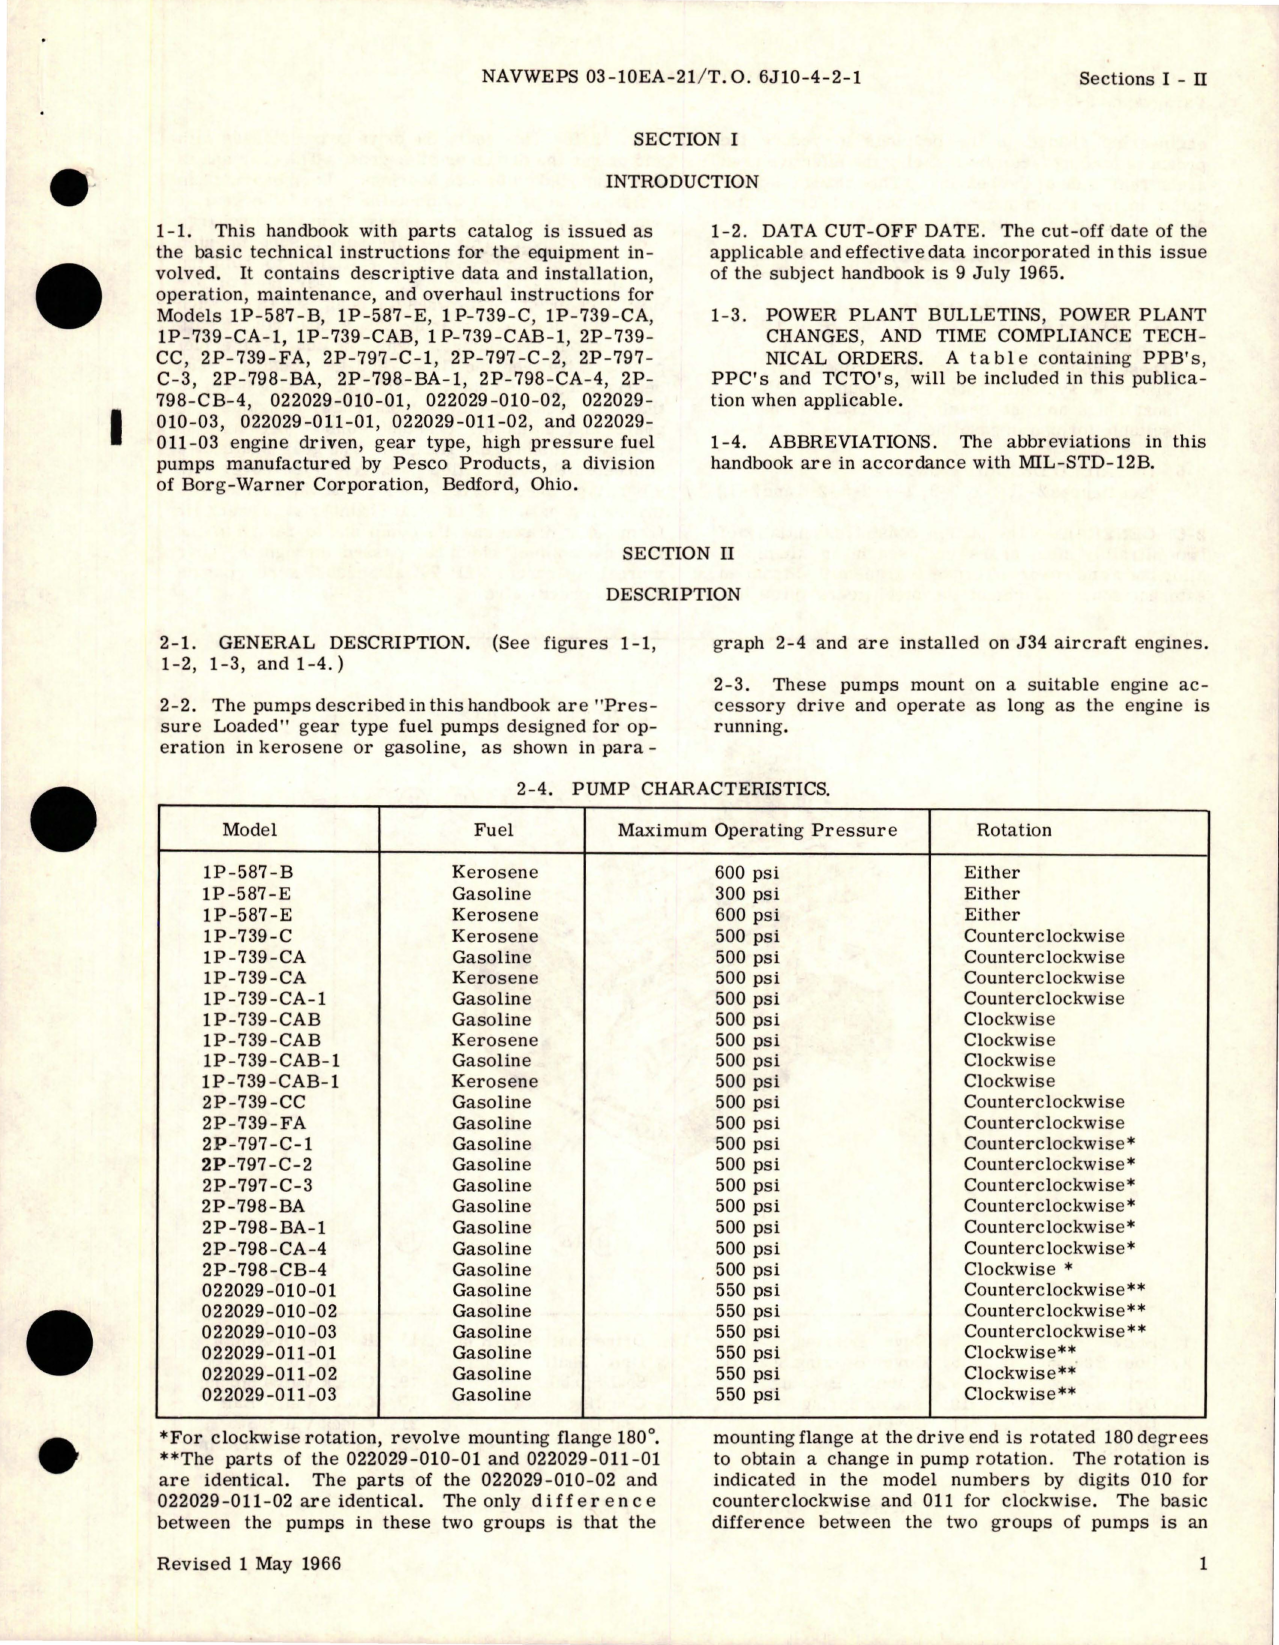 Sample page 7 from AirCorps Library document: Operation, Service and Overhaul Instructions with Parts for Engine Driven Gear Type High Pressure Fuel Pumps